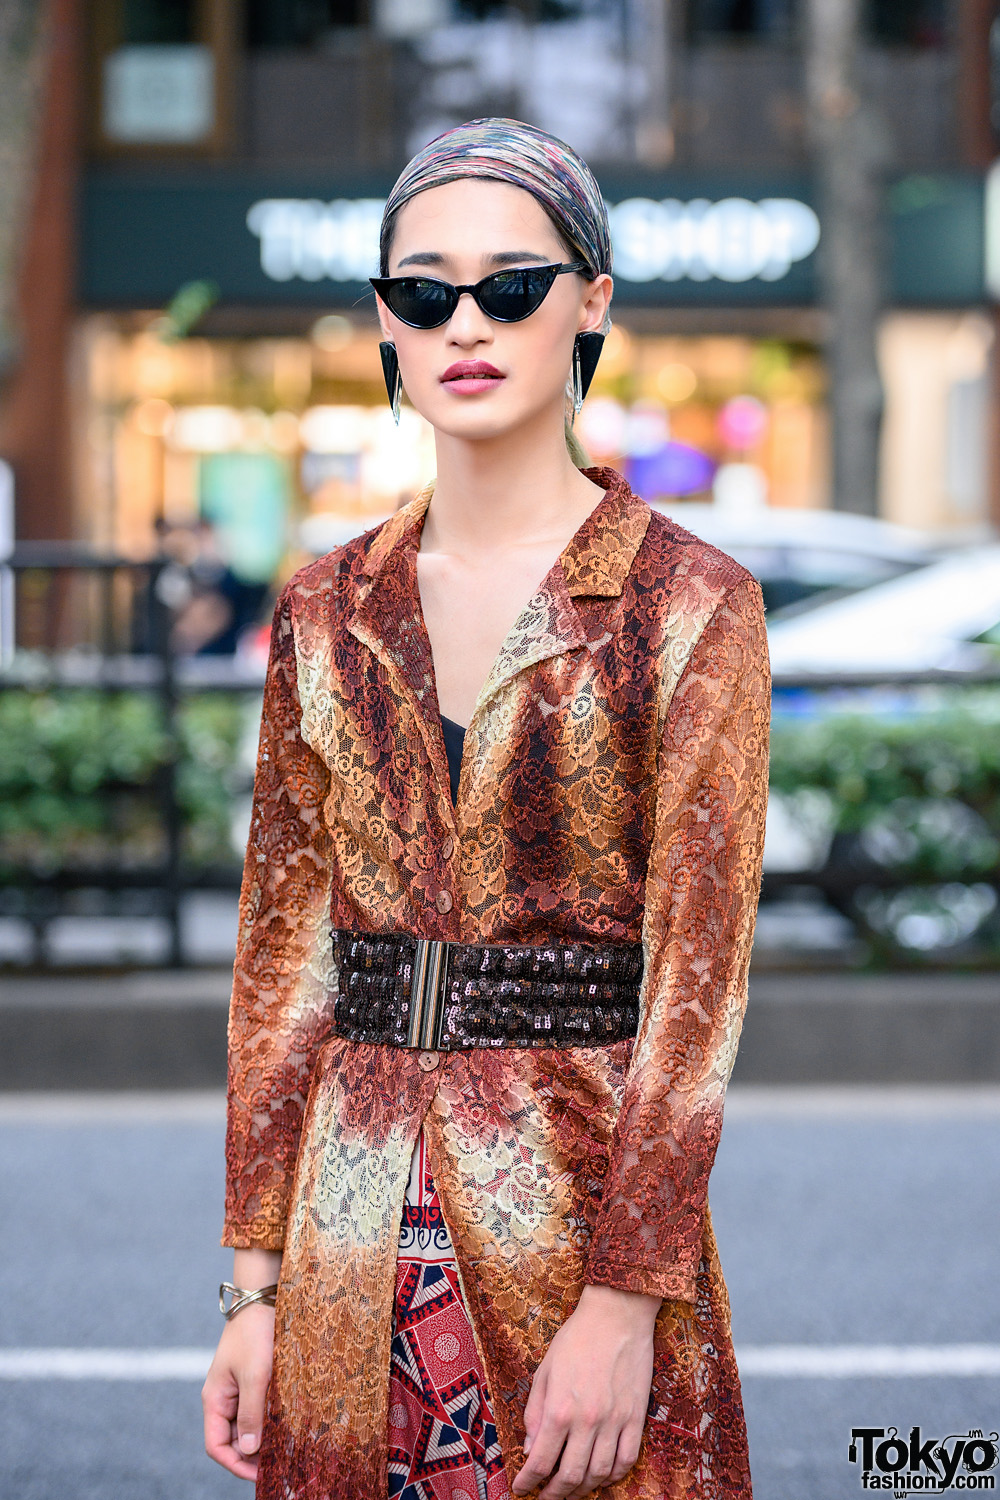 Japanese Style w/ Pointy Sunglasses, Triangle Earrings, Sequin Belt ...